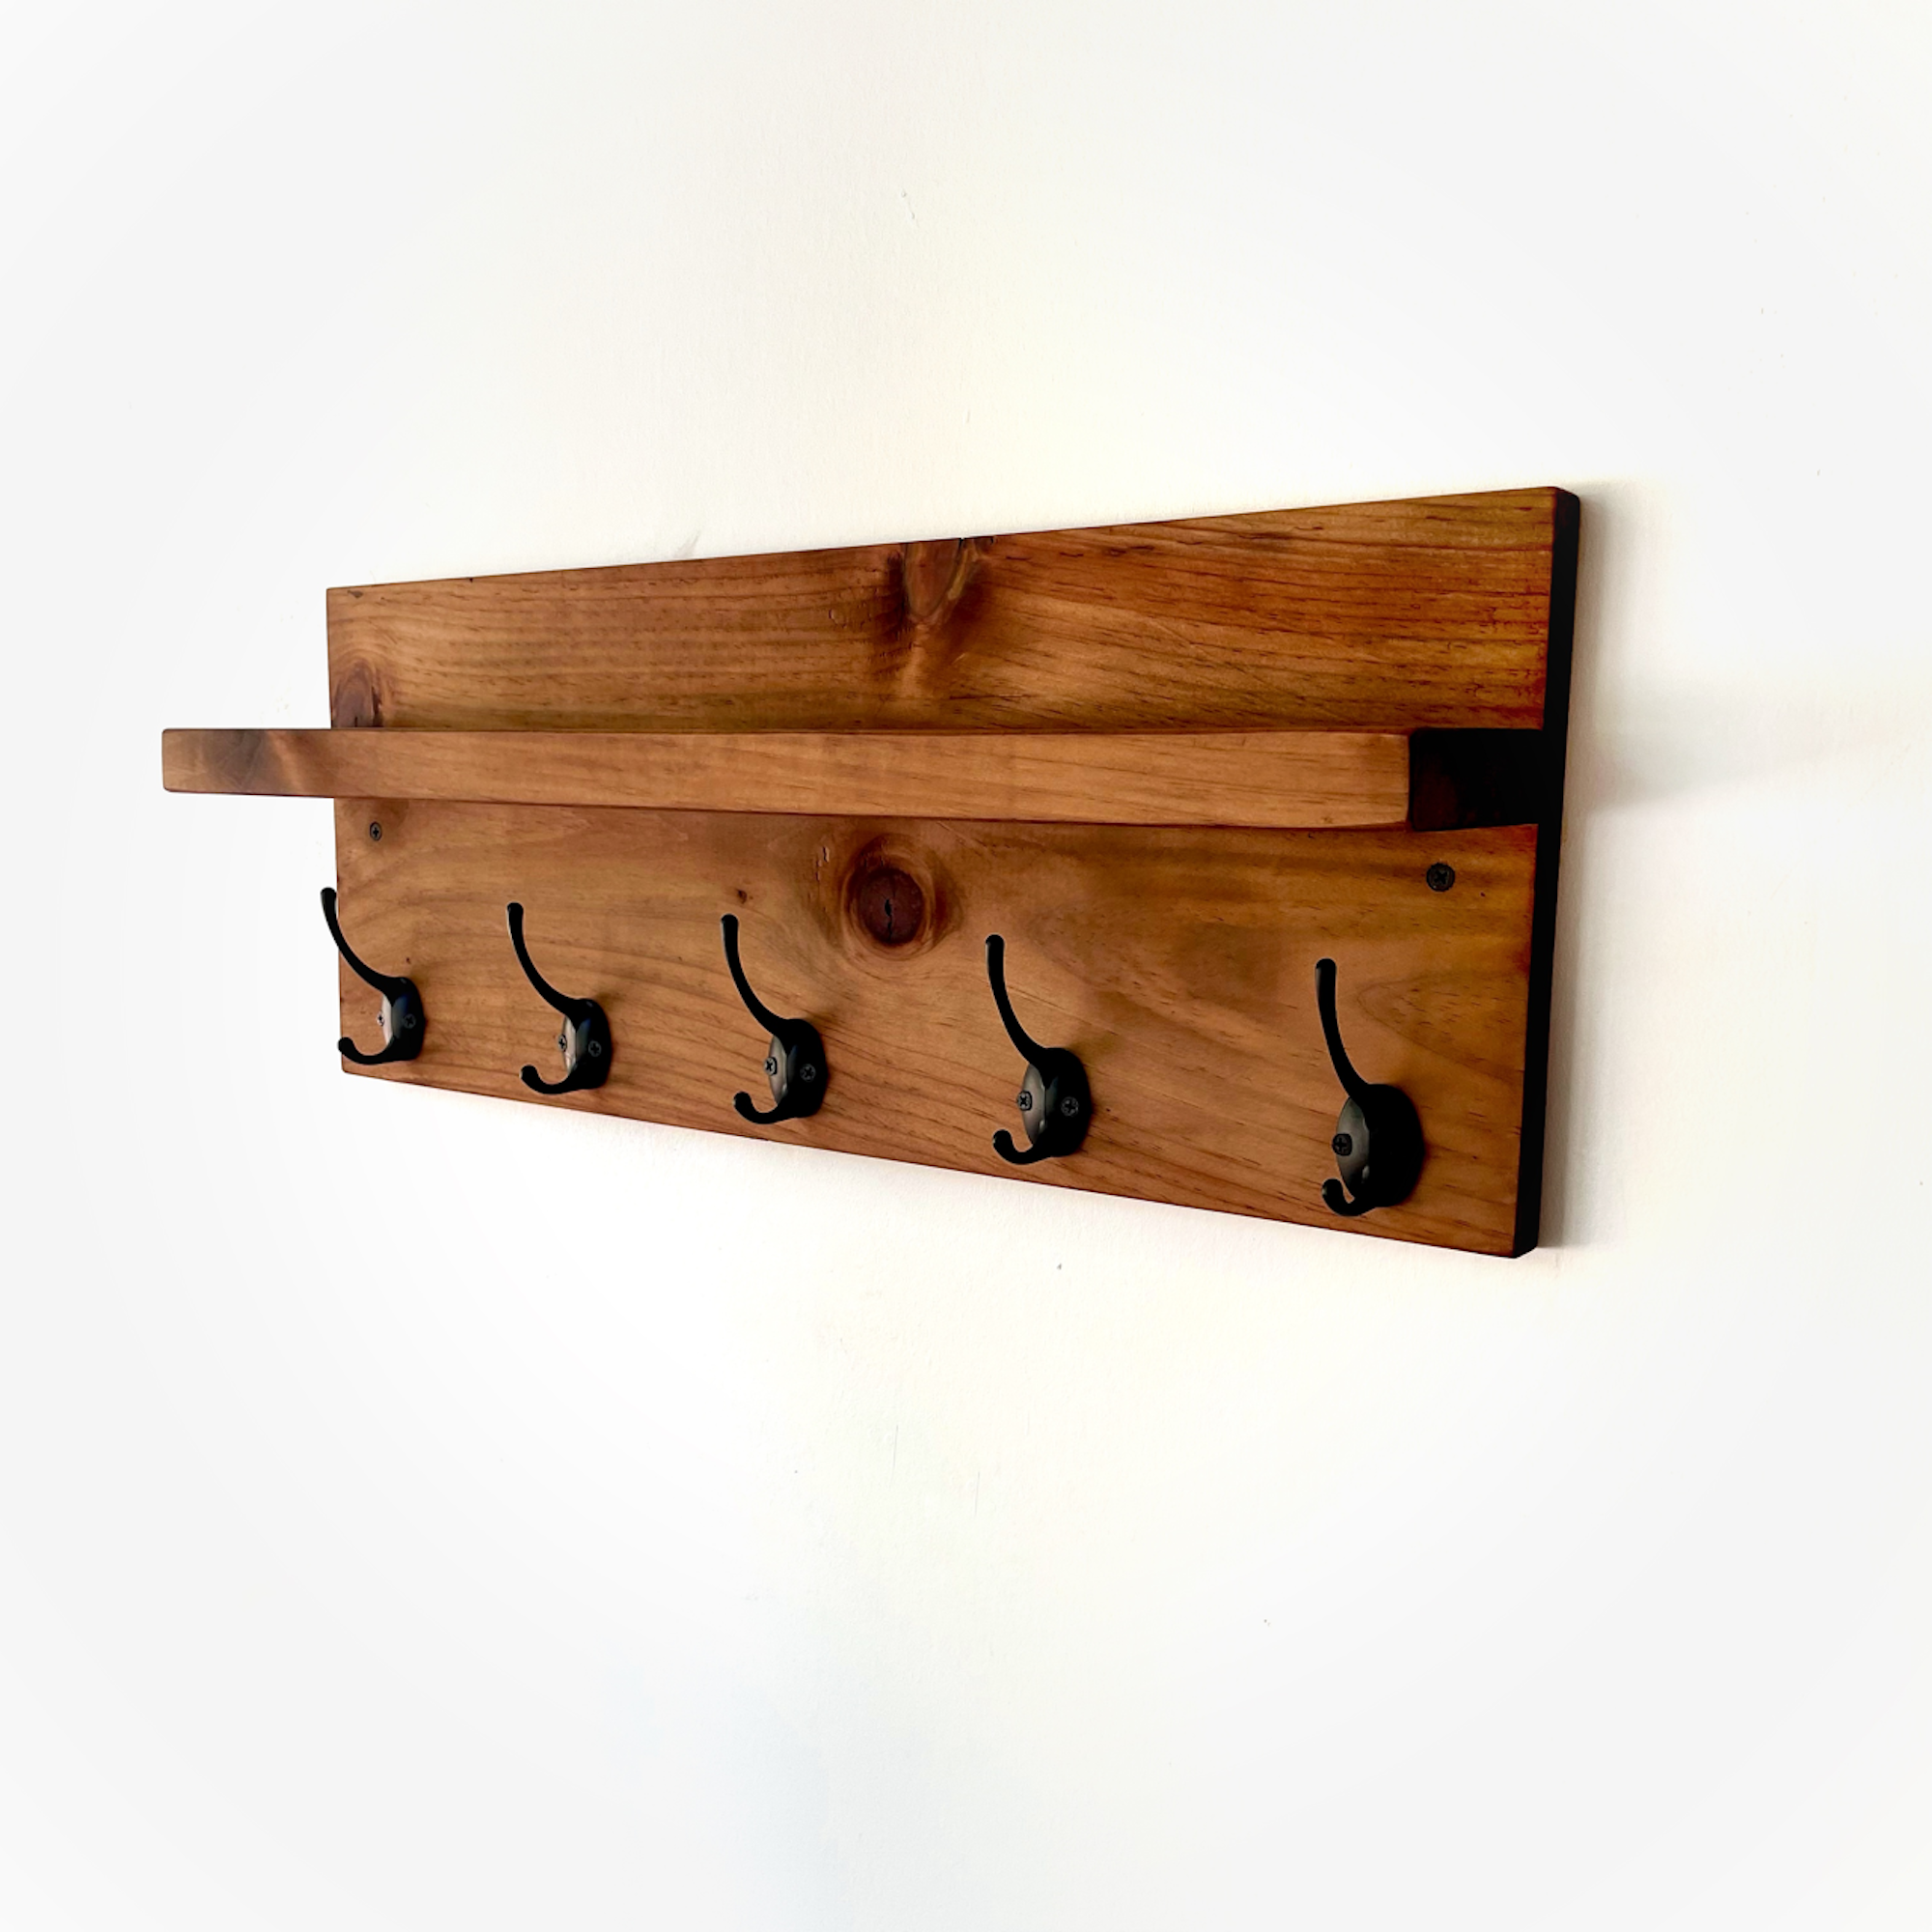 Wall Mounted Clothes Hanger Solid Wood Towel Hook Holder Durable